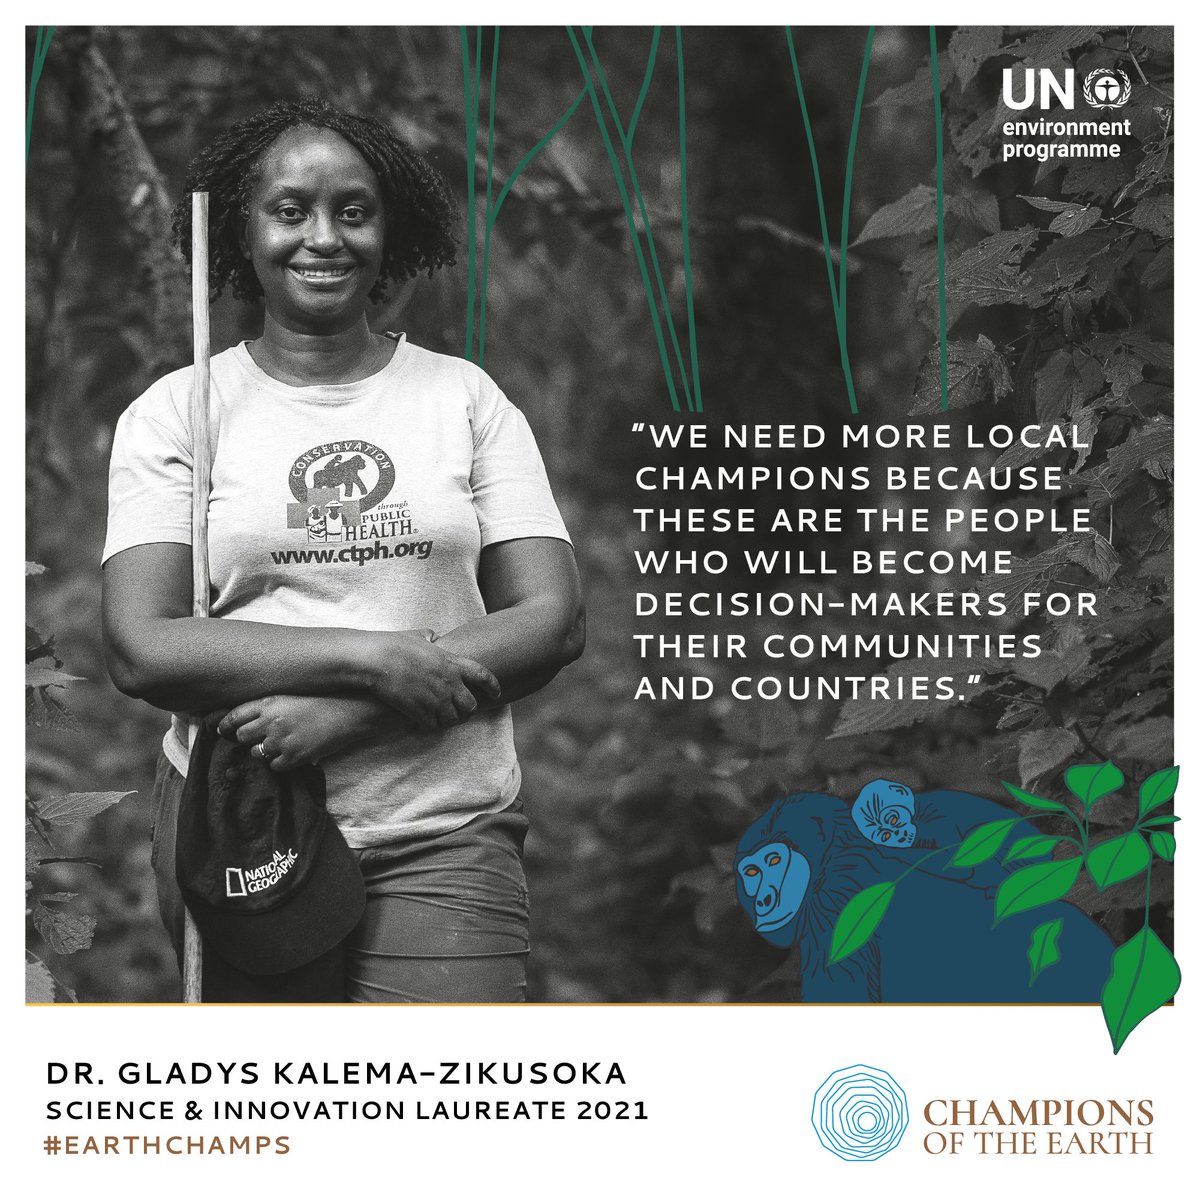 “Having more female role models helps to break barriers, in whatever field it is.'

For #WomenInScience Day, see how #EarthChamps laureate @doctorgladys inspires women to challenge biases and shine in science and other fields. unep.org/championsofear…